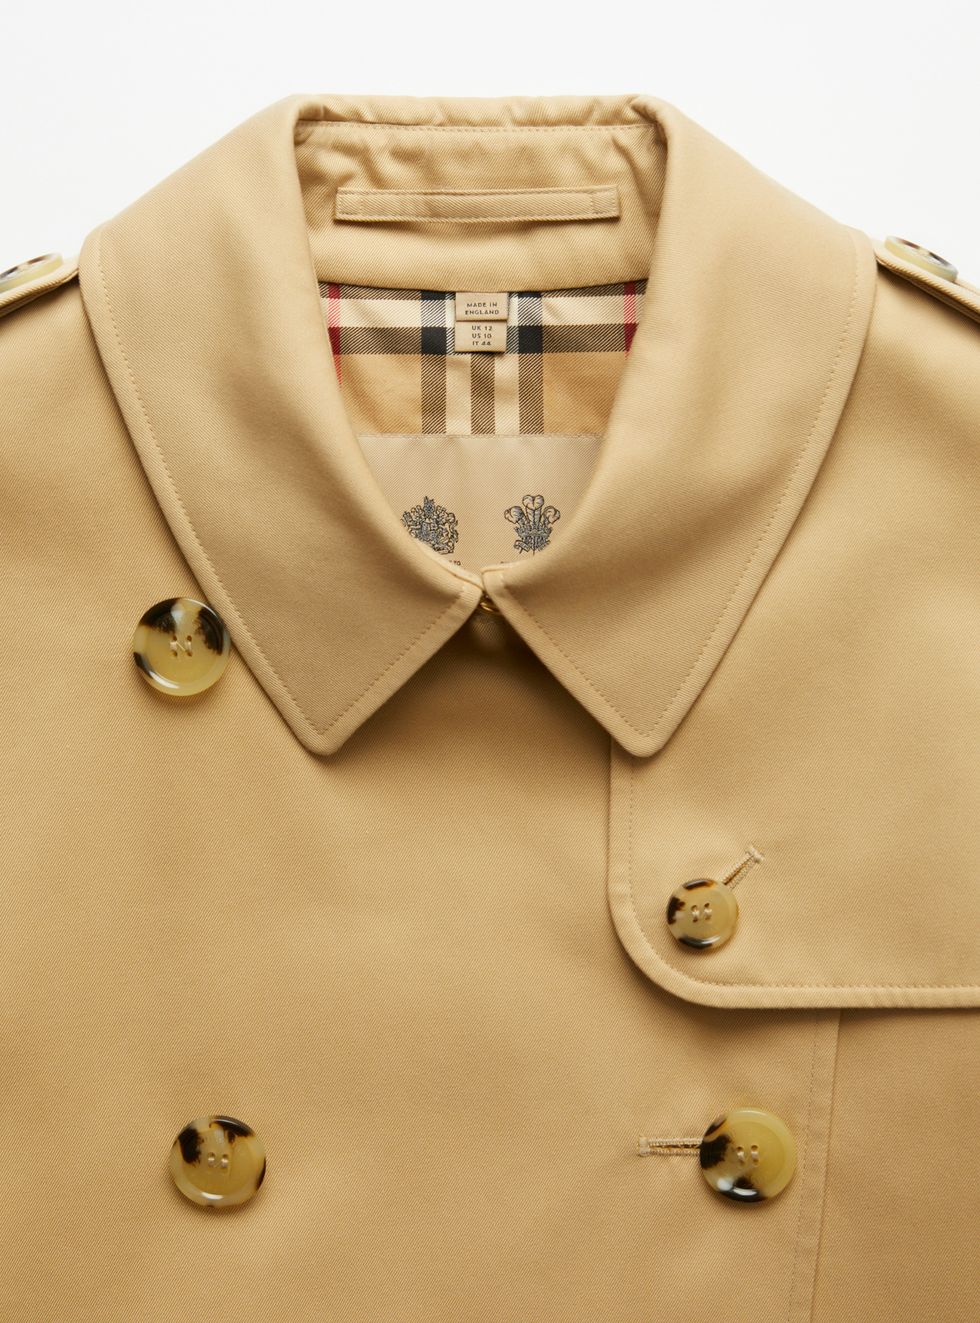 Burberry partners with Vestiaire Collective on resale